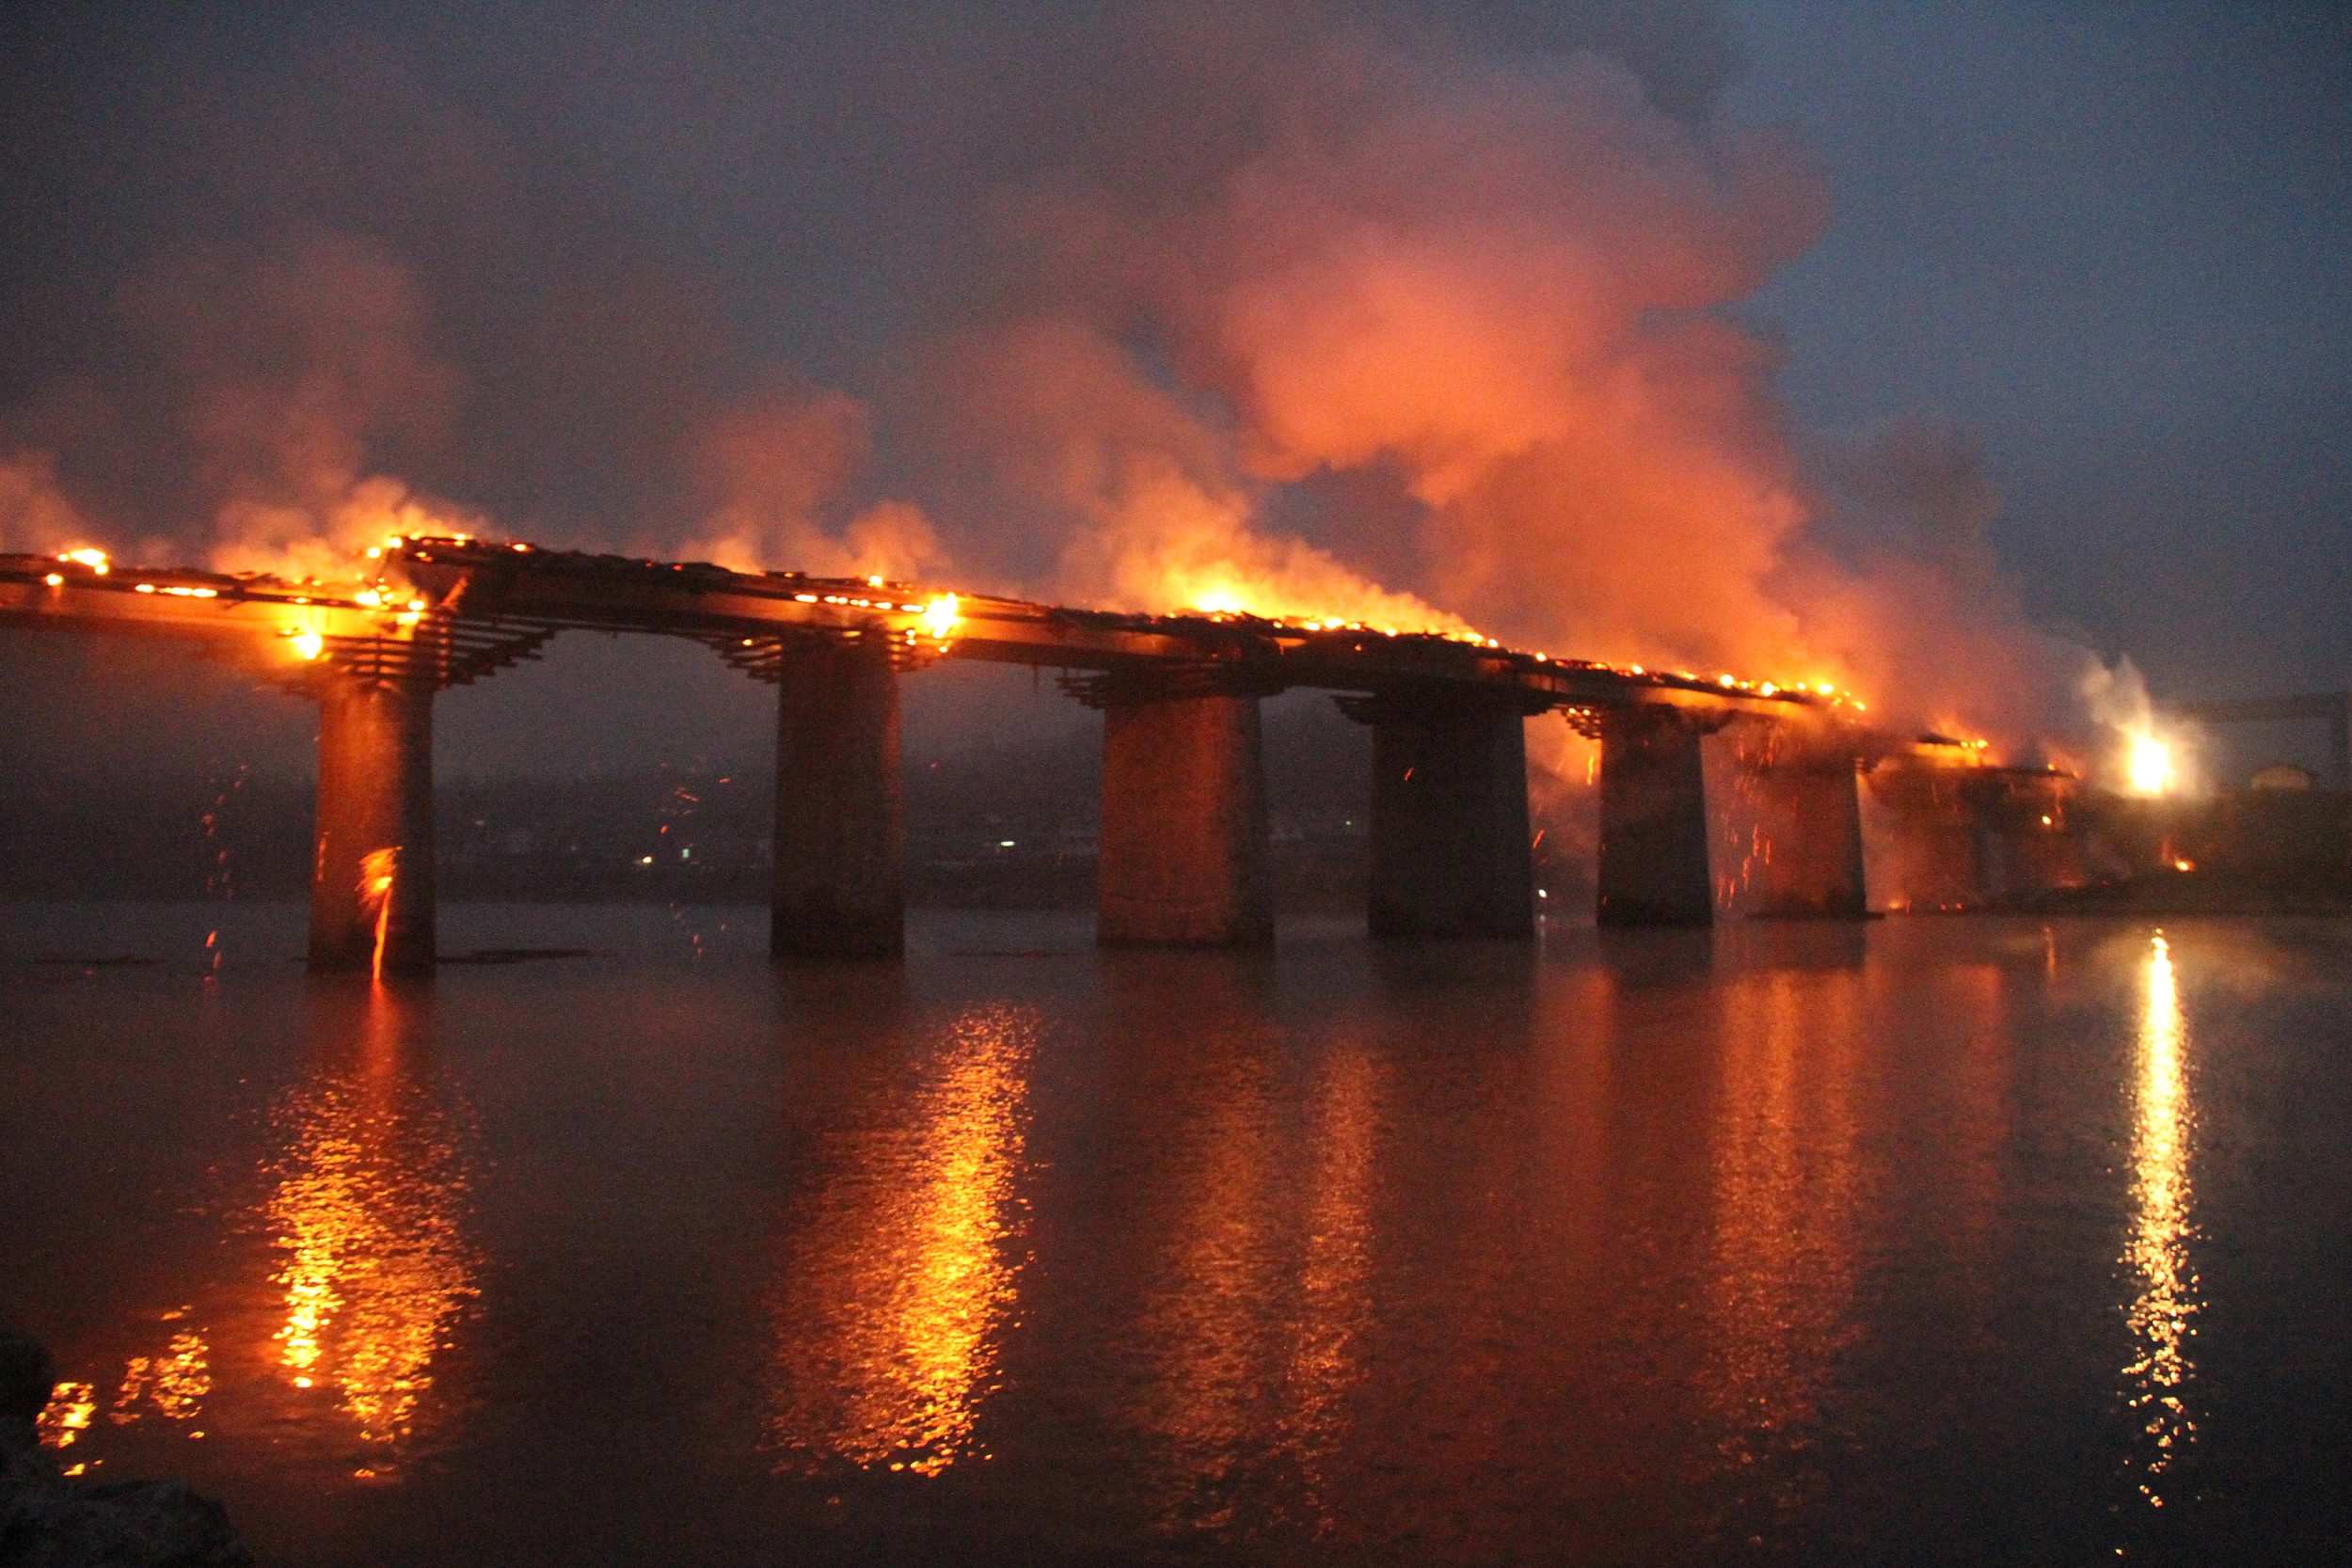 The bridge was ruined by a fire in 2013. /